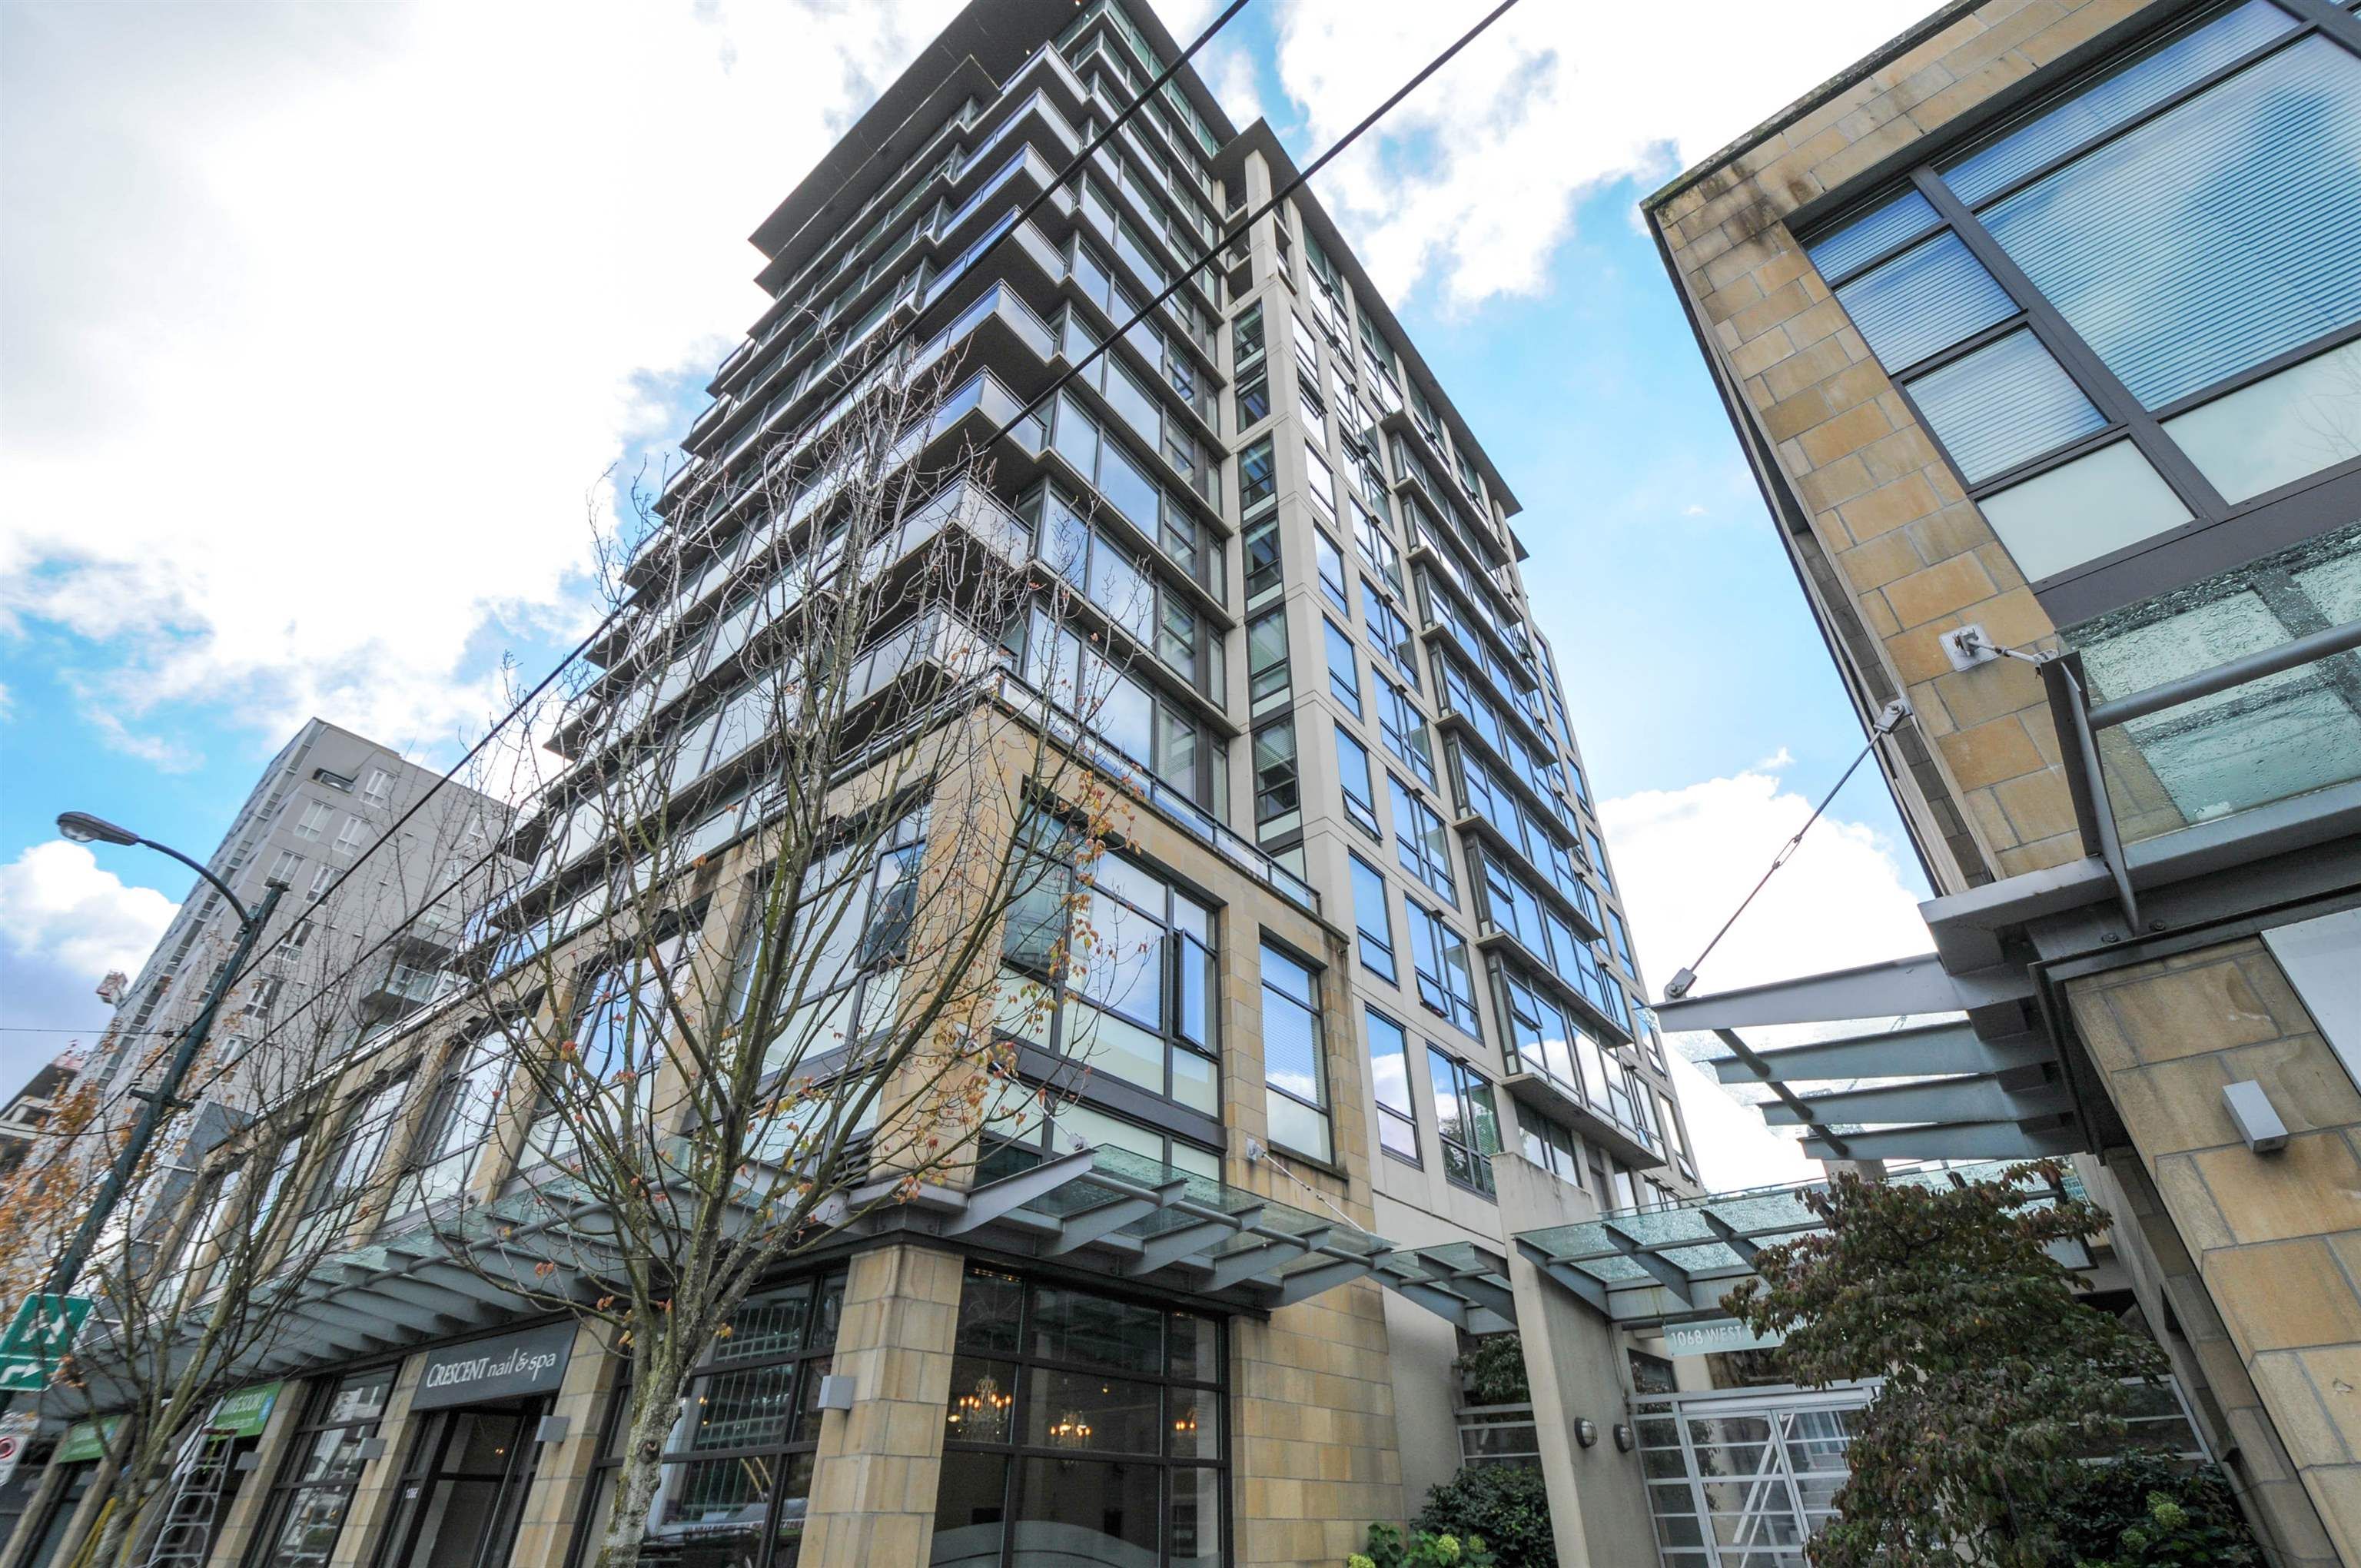 Main Photo: 1005 1068 W BROADWAY in Vancouver: Fairview VW Condo for sale (Vancouver West)  : MLS®# R2611134